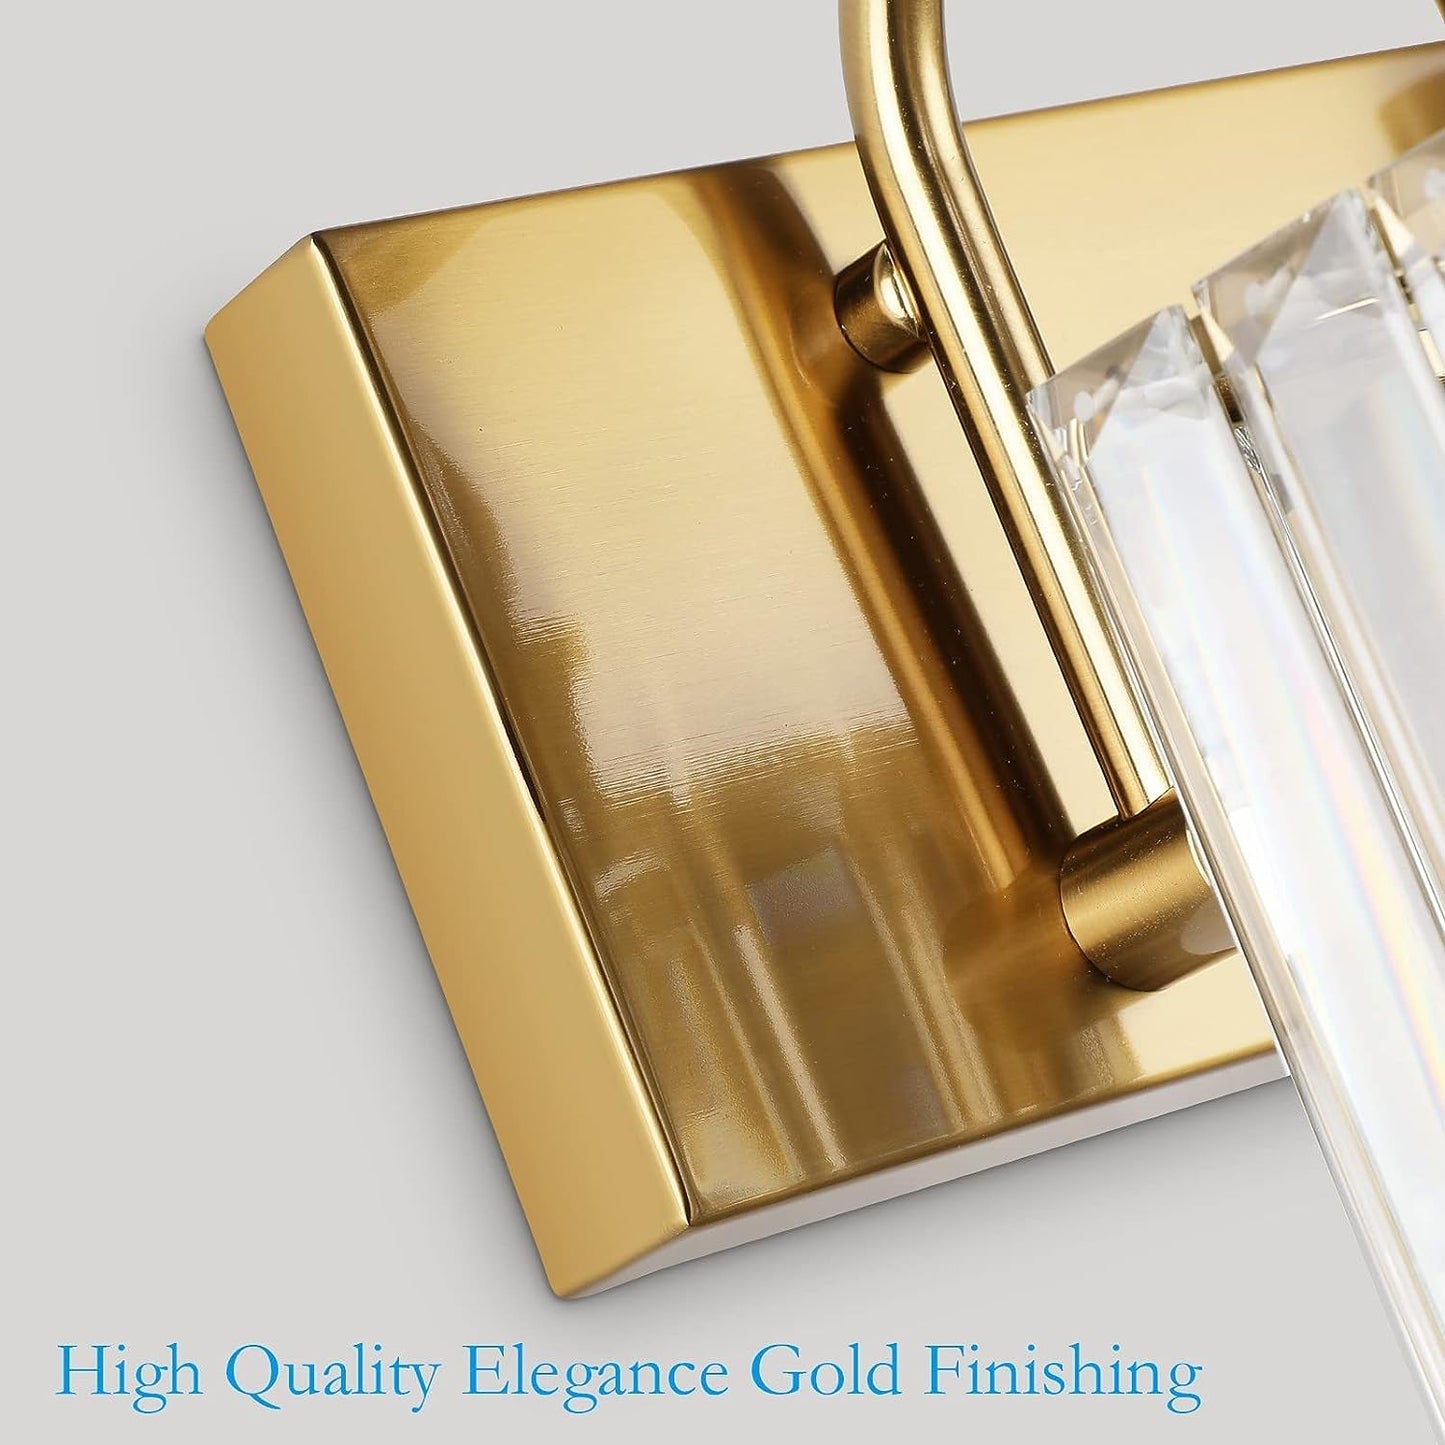 Brighten your bathroom with elegant Crystal Gold Vanity Lights. Illuminate your space with style and sophistication. Shop now for the perfect bathroom lighting solution.